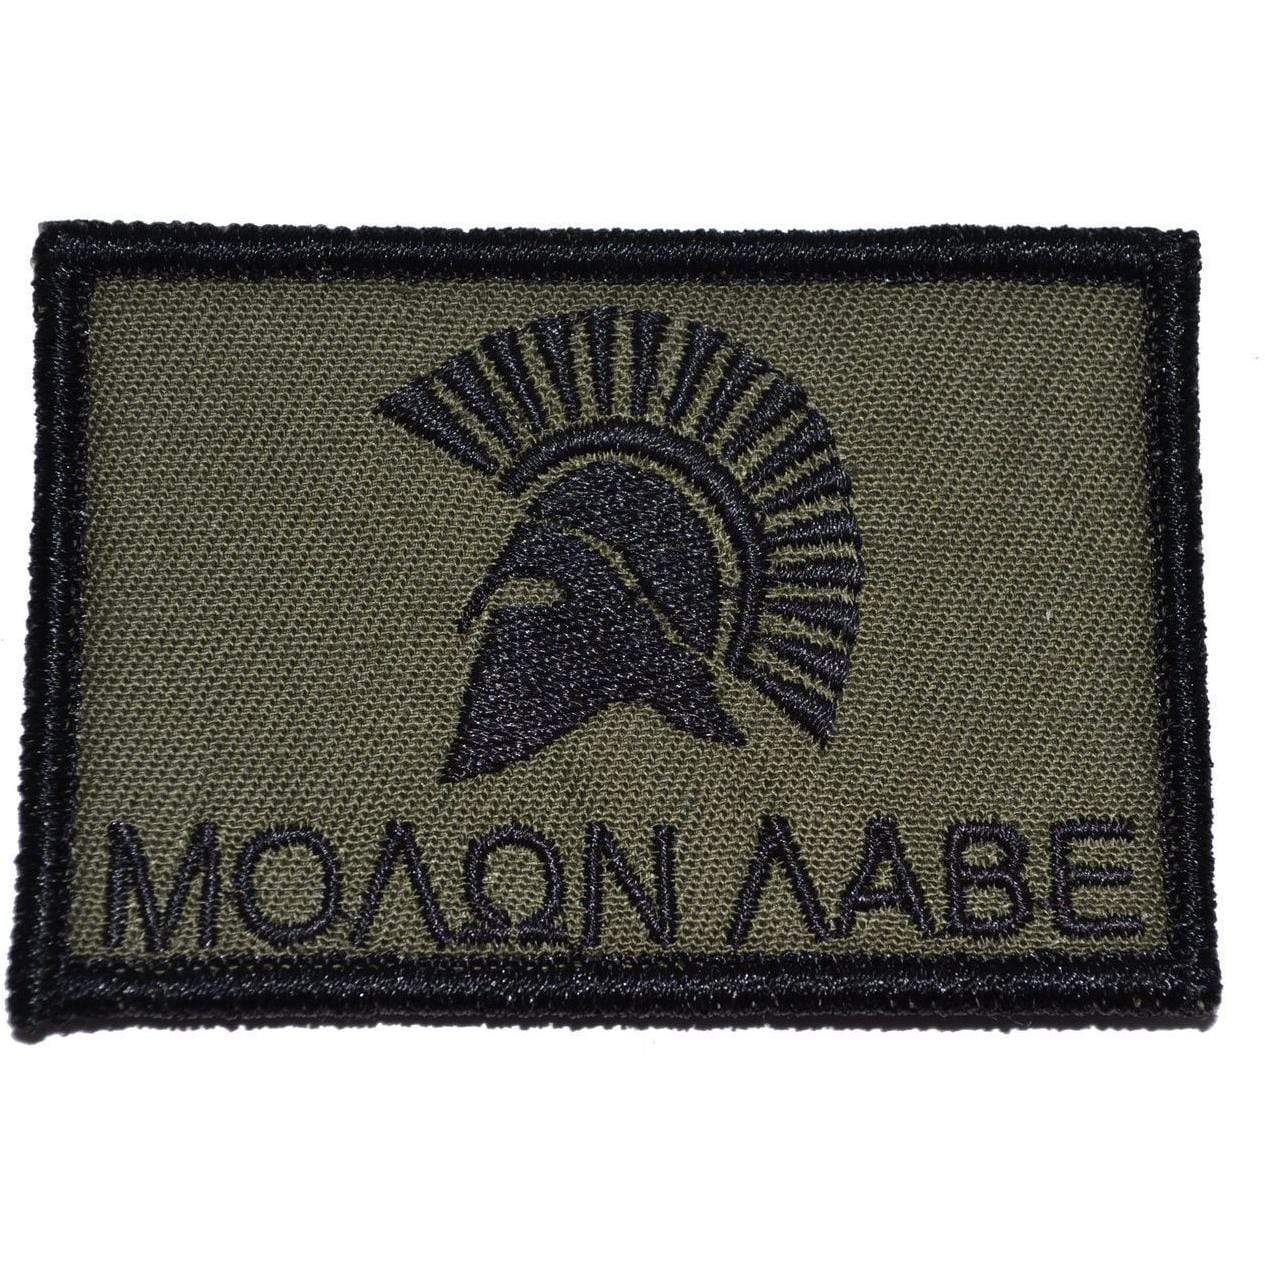 Tactical Gear Junkie Patches Olive Drab Molon Labe Spartan Head - 2x3 Patch